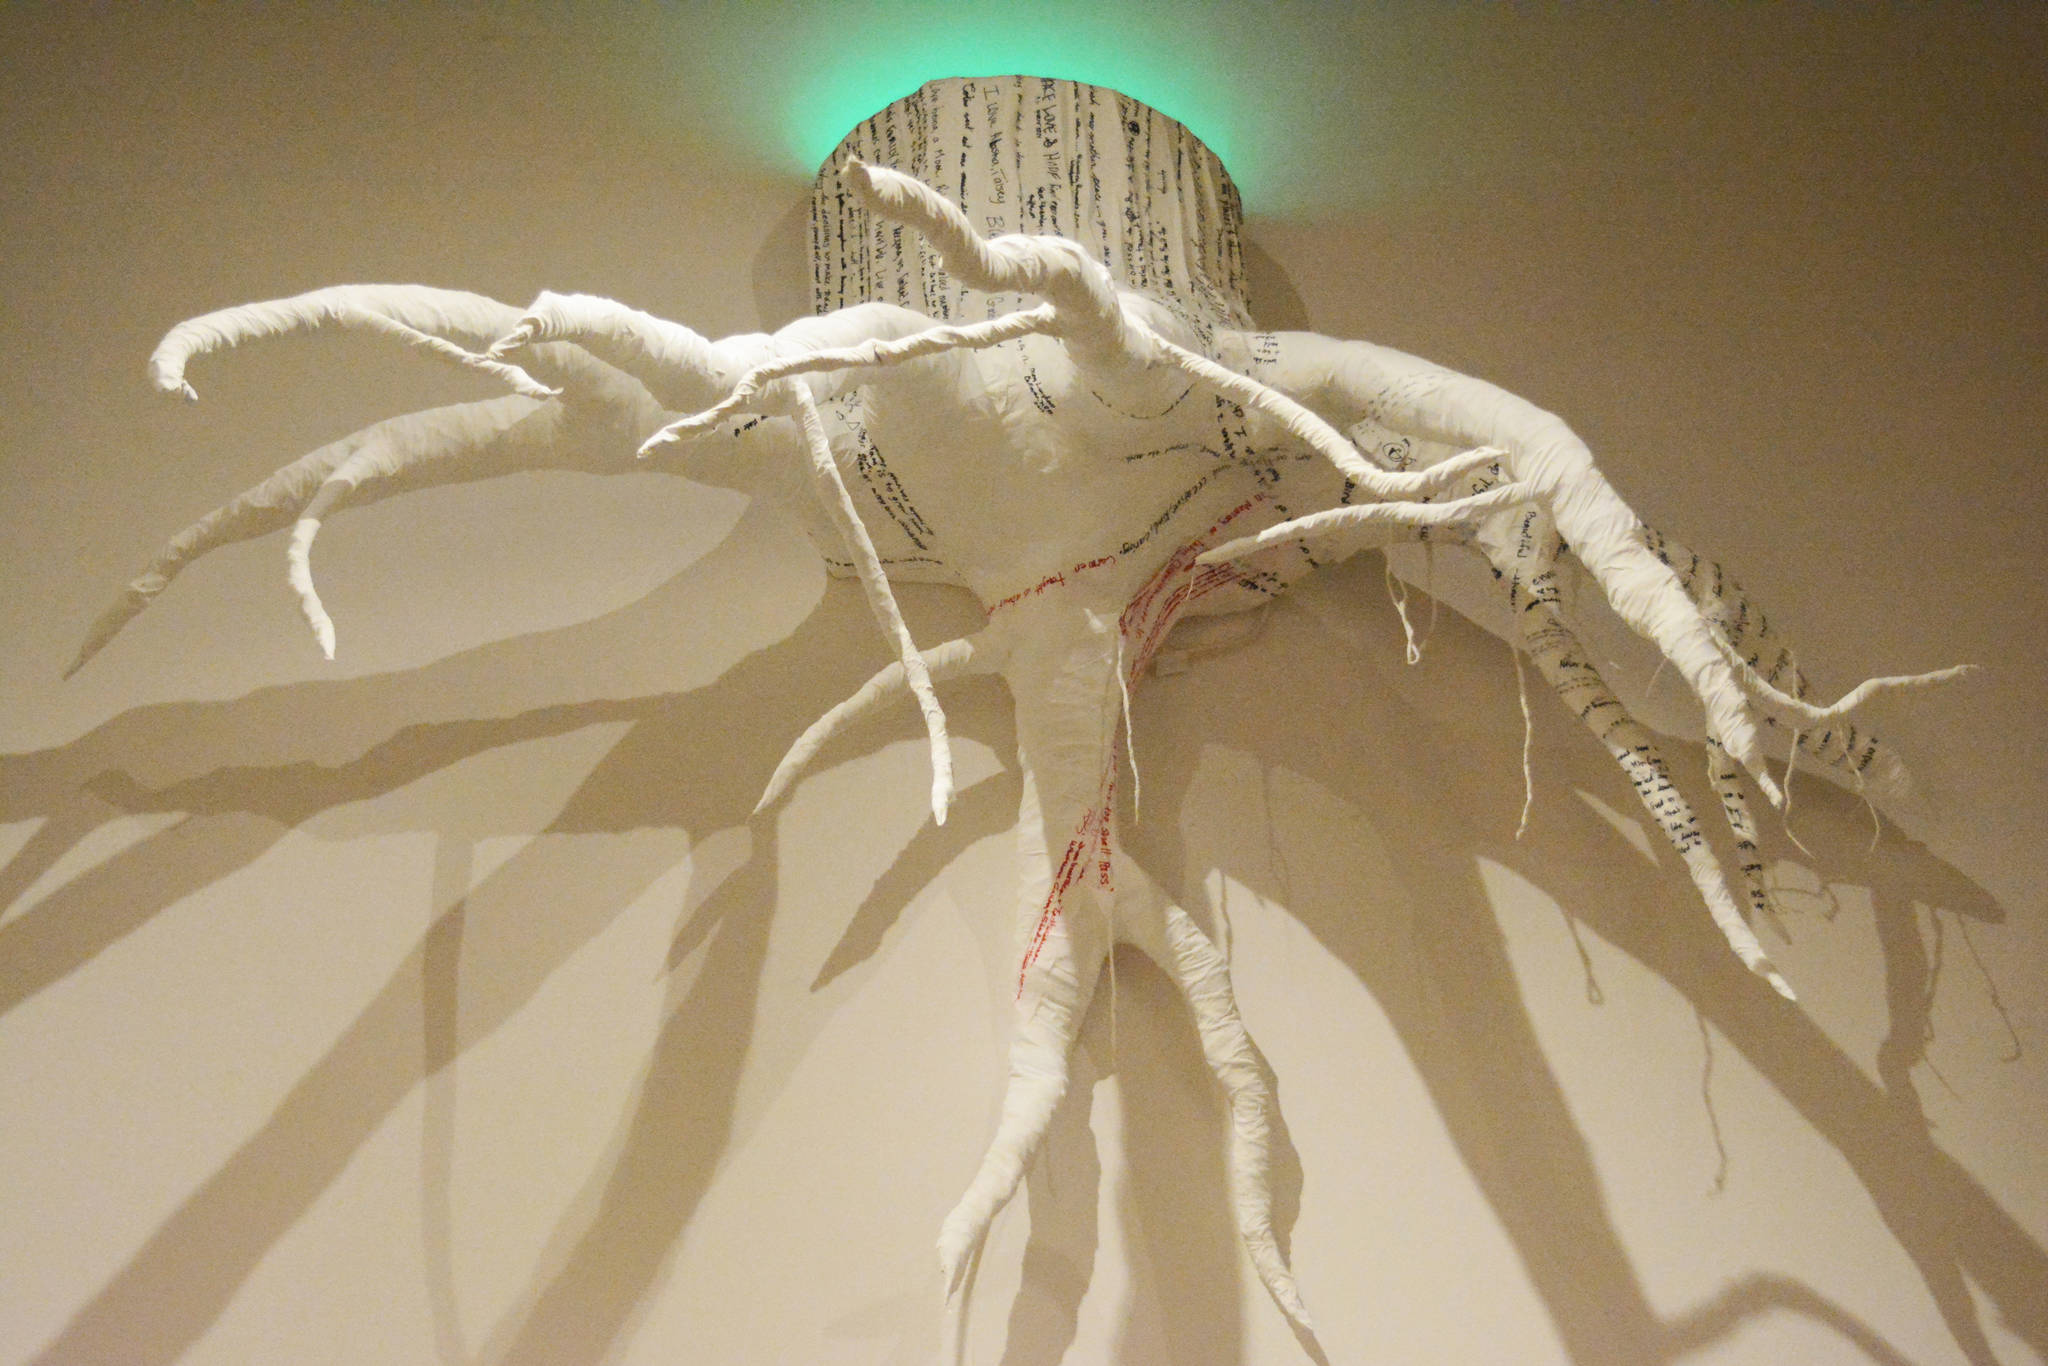 Lynn Naden’s giant Root Ball in her Root shows. (Photo by Michael Armstrong, Homer News)